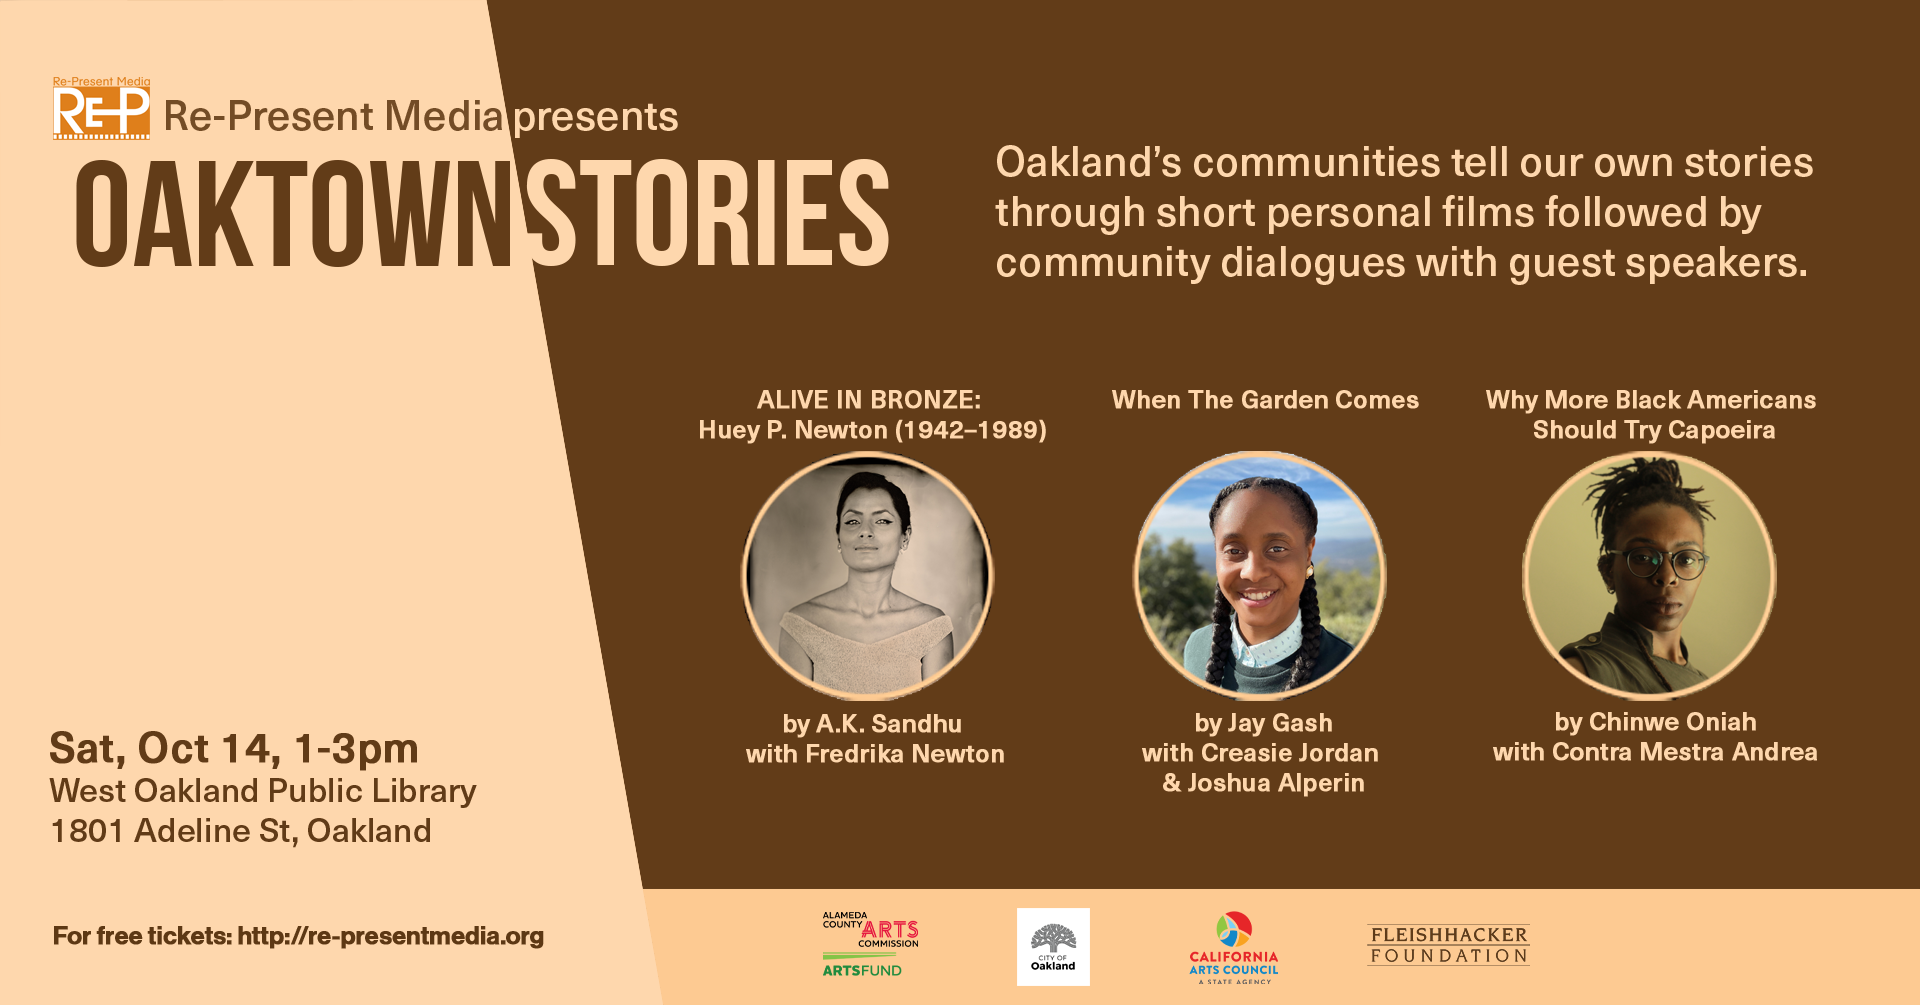 Oaktown Stories - Oct 14 West Oakland Branch Oakland Public Library 1801 Adeline St, Oakland, CA 94607. Saturday, October 14 2023 1:00 PM - 3:00 PM "Why More Black Americans Should Try Capoeira" (Chinwe Oniah) With Contra Mestra Andrea. "When The Garden Comes" (Jay Gash) With Creasie Jordan and Joshua Alperin. "ALIVE IN BRONZE: Huey P. Newton (1942–1989)" (A.K. Sandhu) With Fredrika Newton. For free tickets: https://re-presentmedia.ticketleap.com/oaktownstories2023-1